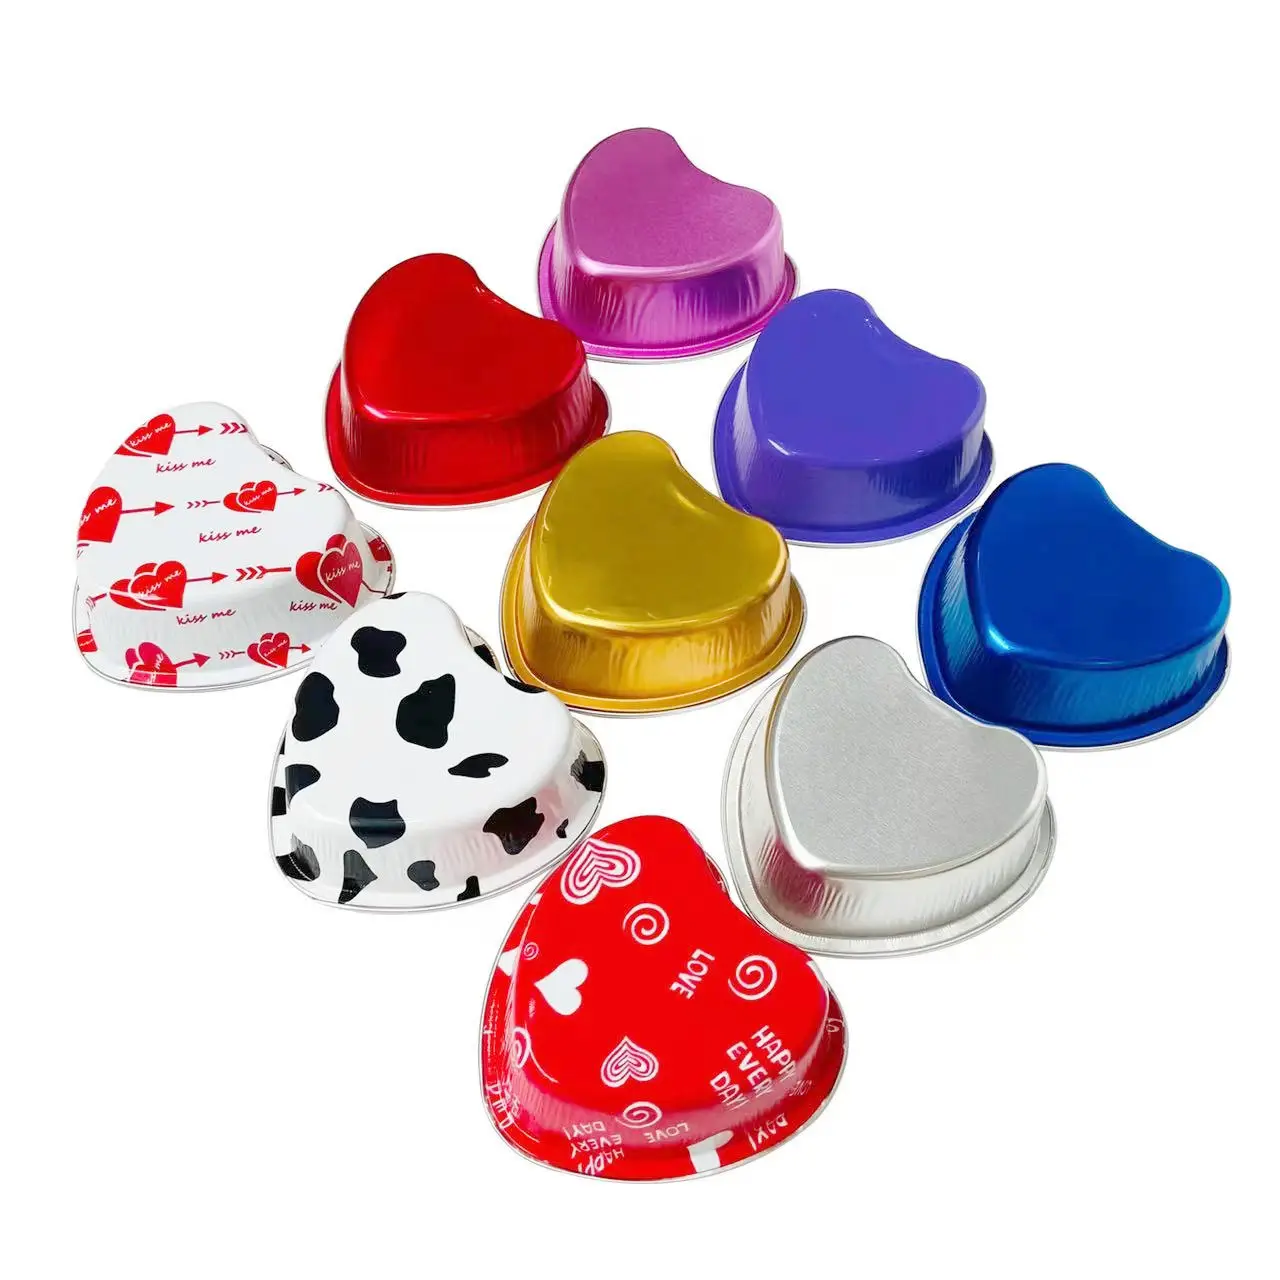 Heart Shaped Aluminum Foil Bakery Food Packaging Box Disposable Dessert Chocolate Container Homeuse Bakery Tools